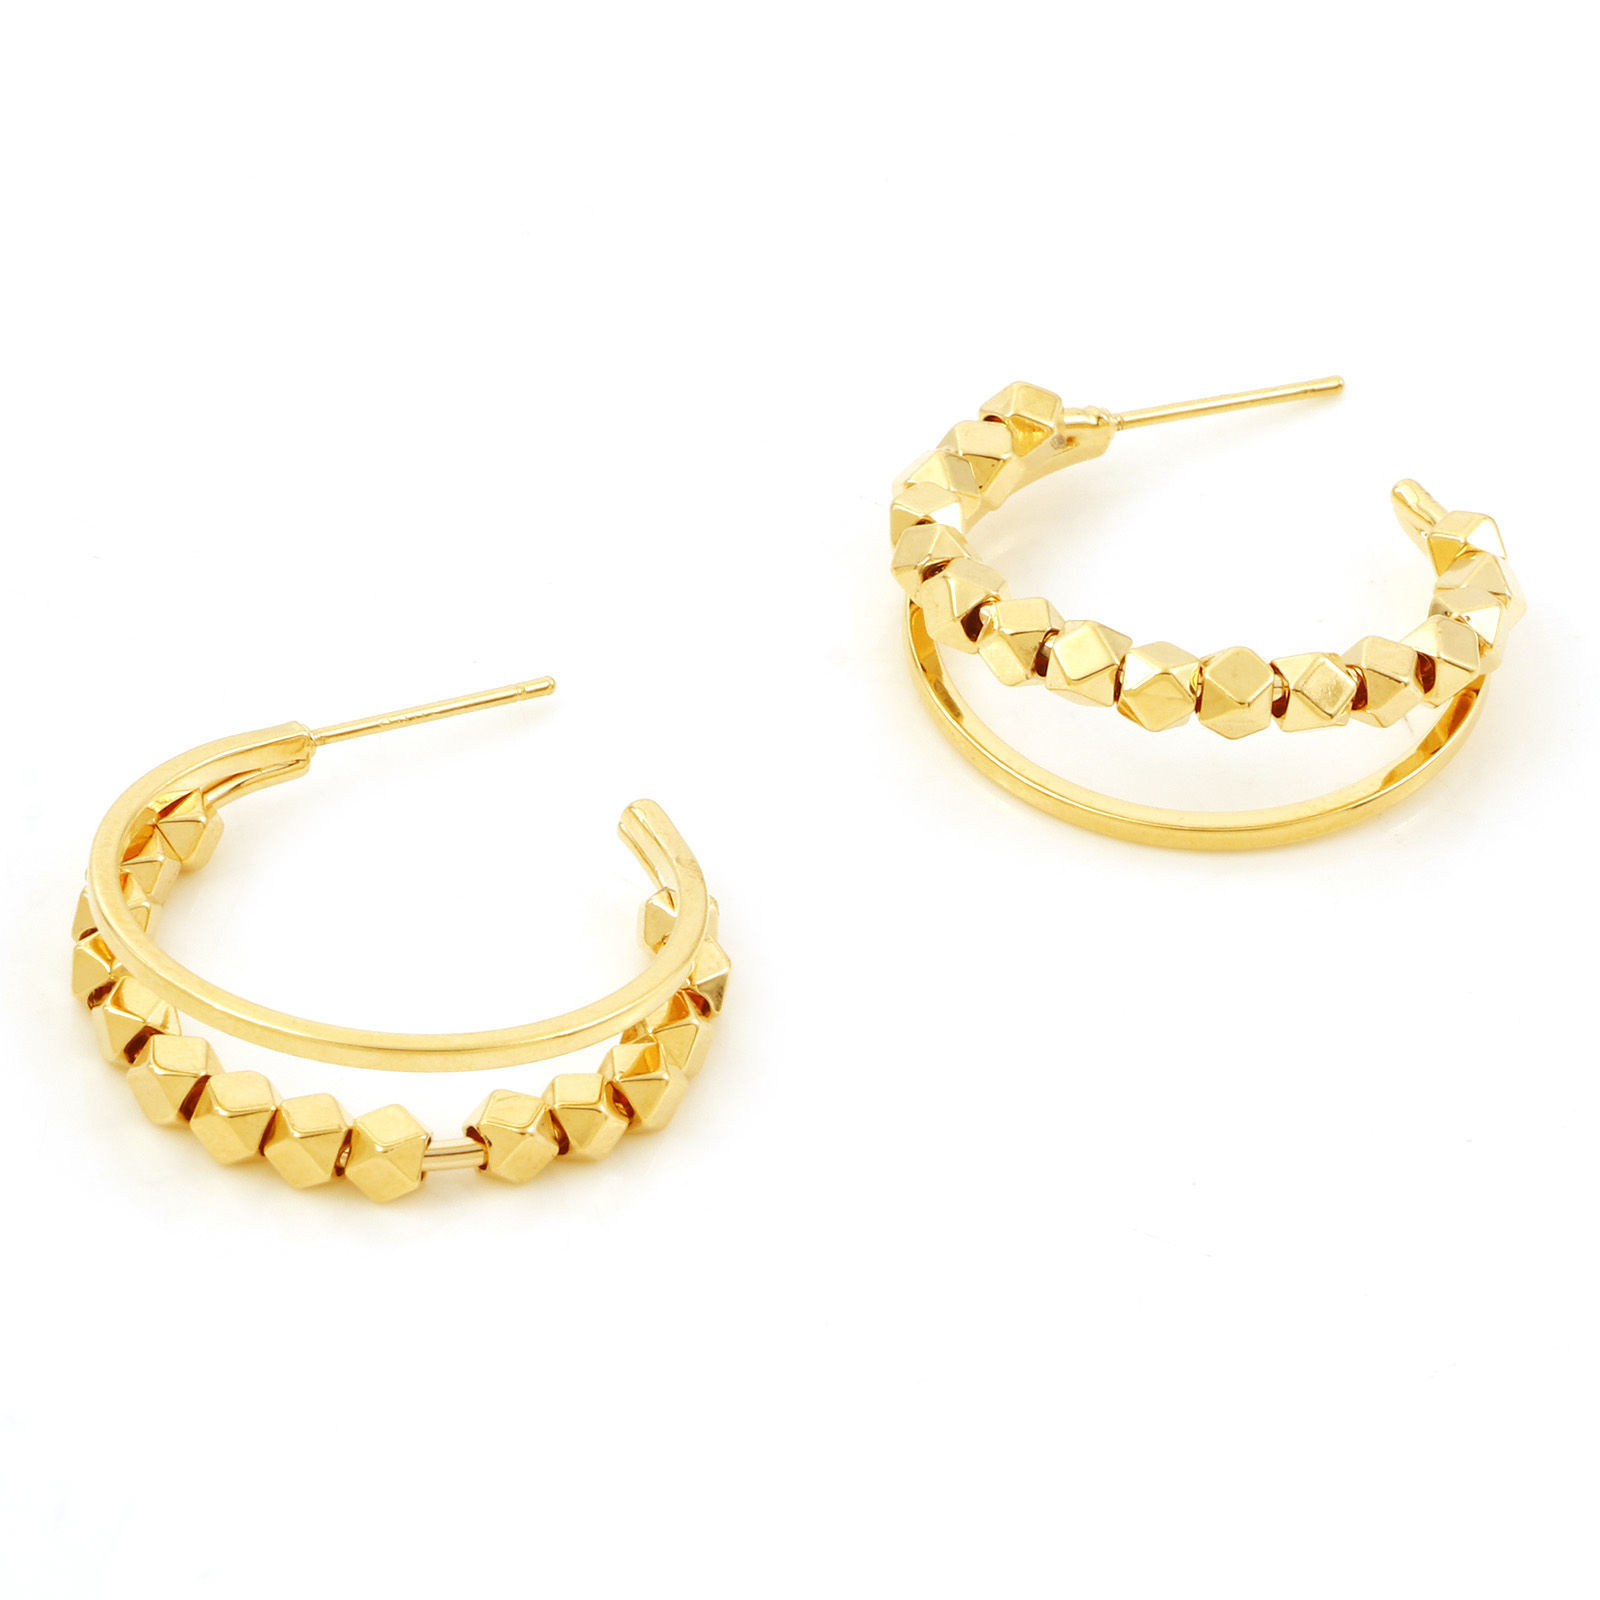 Picture of Copper Stylish Hoop Earrings Real Gold Plated C Shape 27mm x 26mm, Post/ Wire Size: (21 gauge), 30 PCs